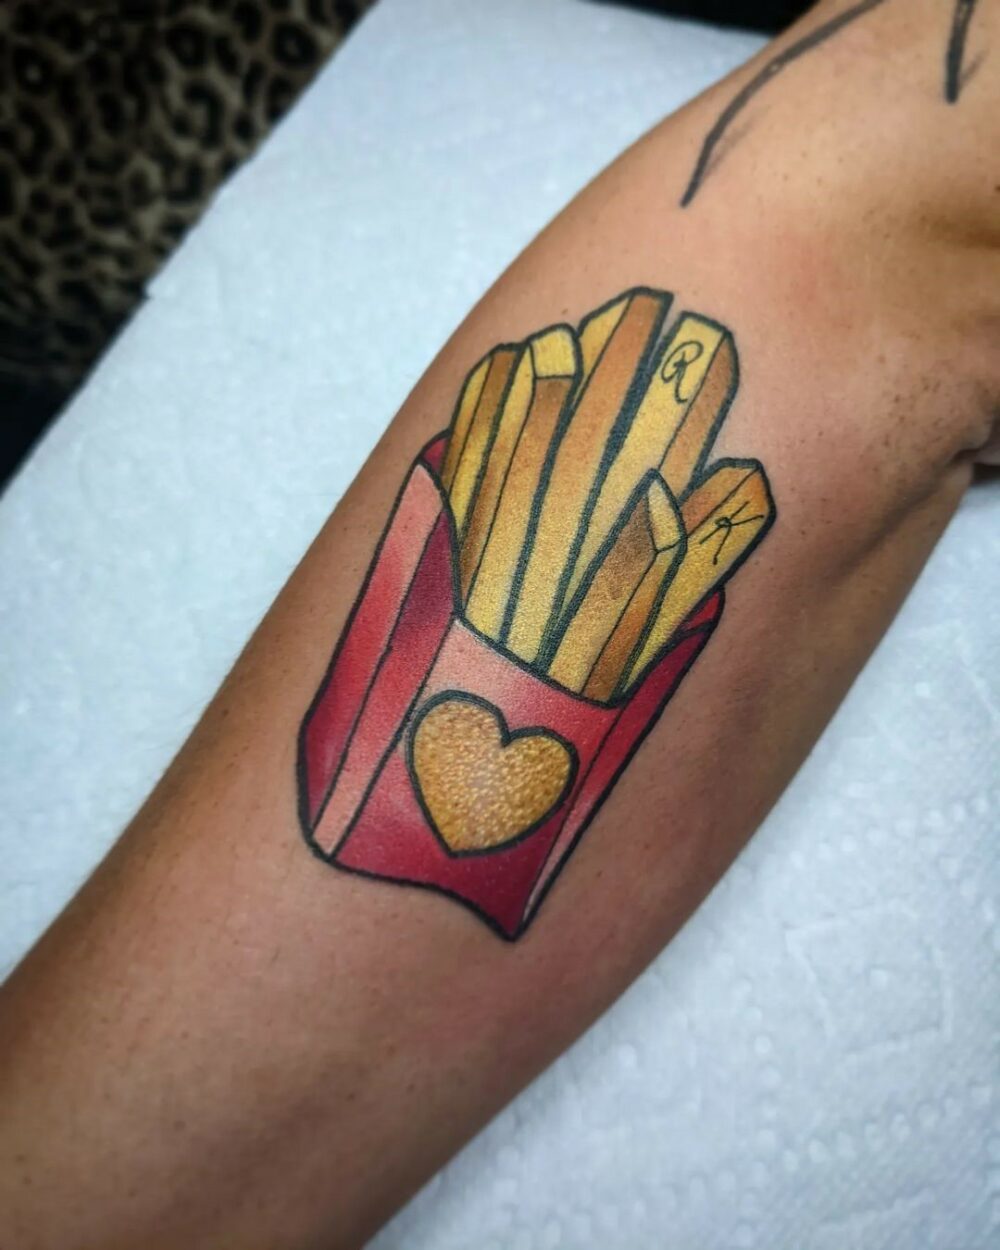 If you want a tattoo with a little more whimsy a French fry design is a fantastic option